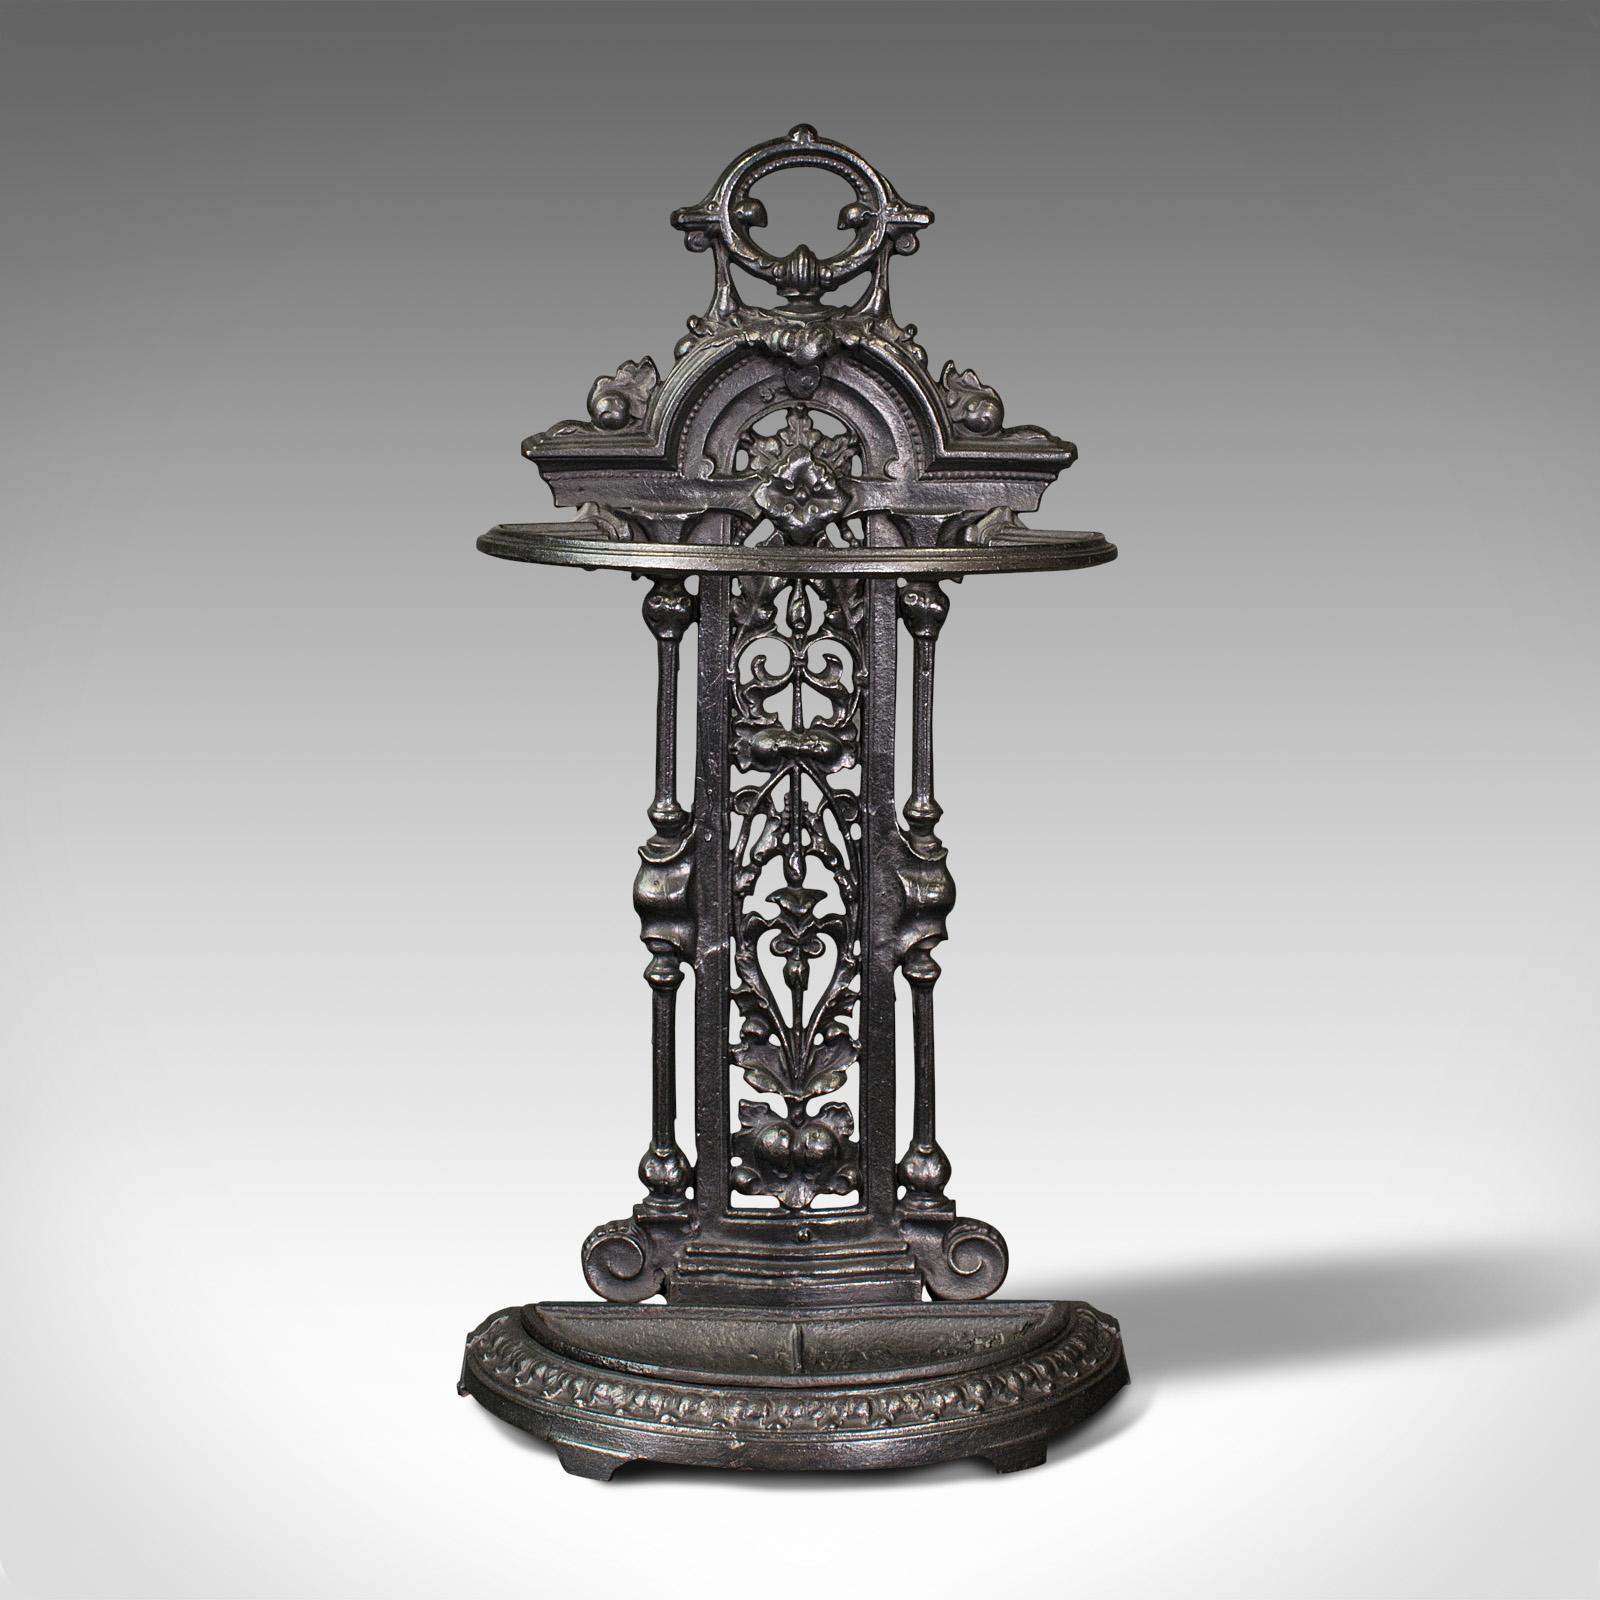 This is an antique decorative hall stand. An English, cast iron stick rack in the manner of Coalbrookdale, dating to the Edwardian period, circa 1910.

Wonderfully ornate hallway stand, with the distinctive manner of Coalbrookdale
Displays a